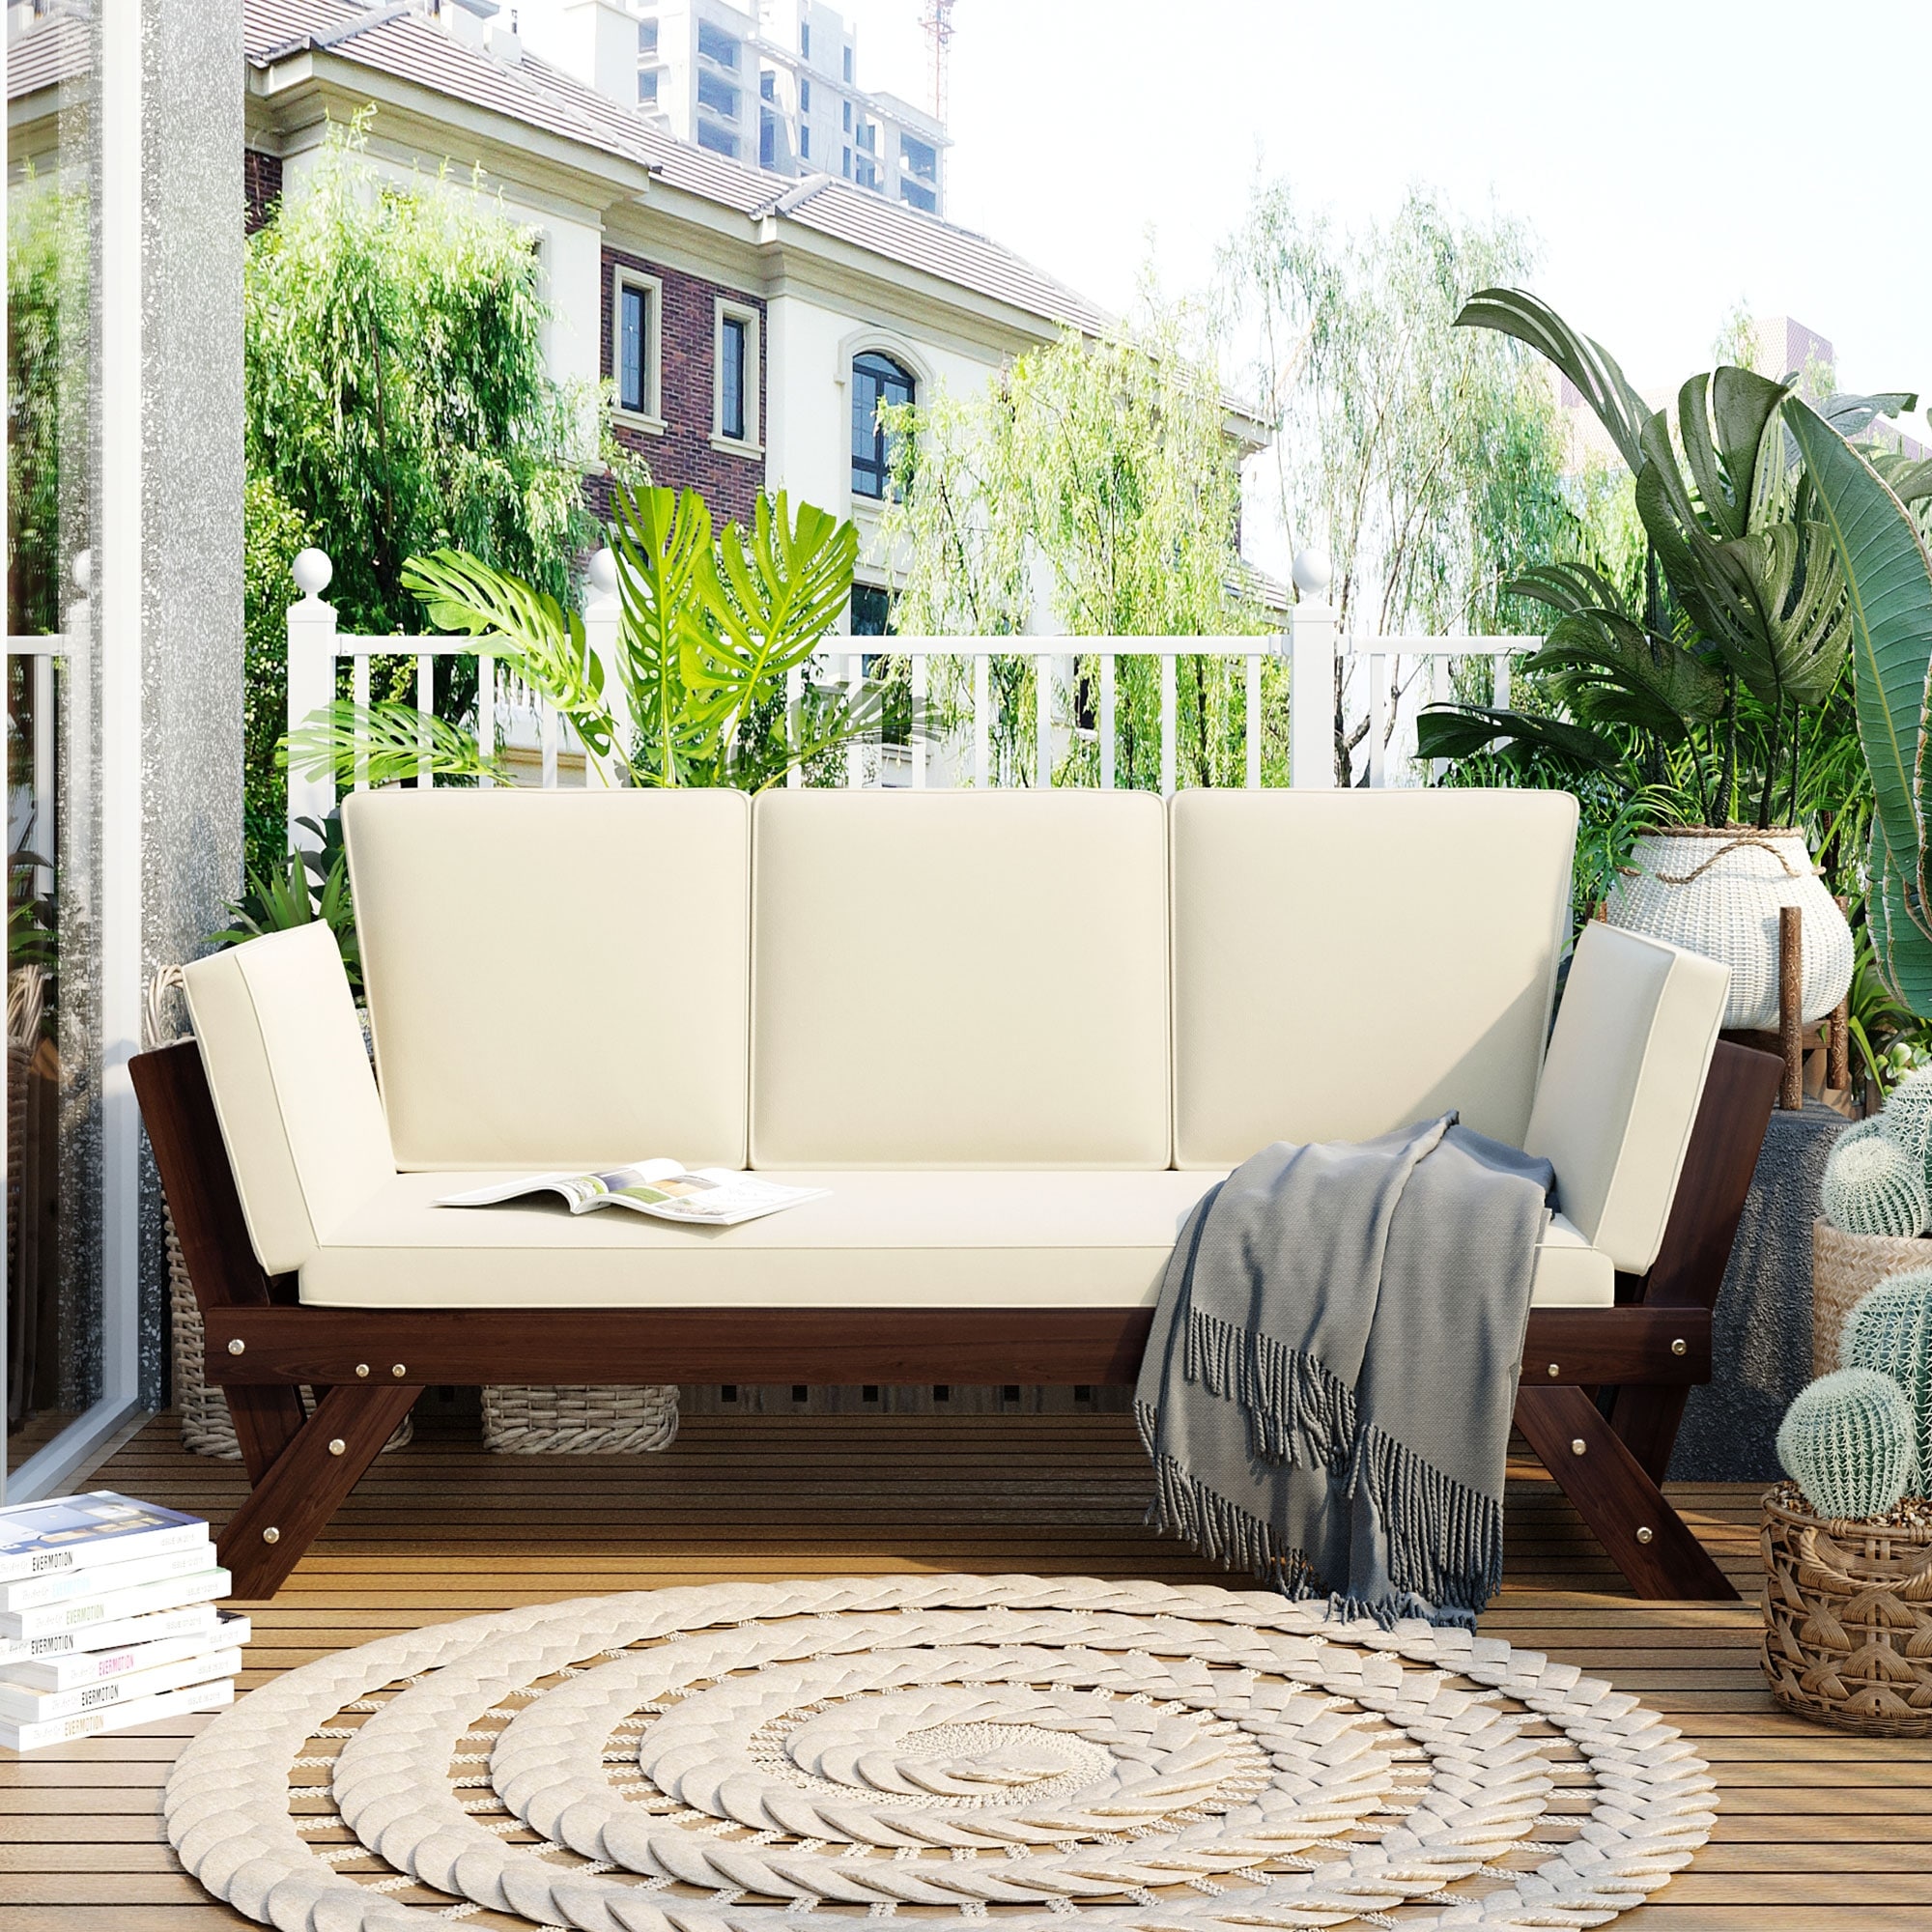 Global Pronex Outdoor Adjustable Patio Wooden Daybed Sofa Chaise Lounge With Cushions